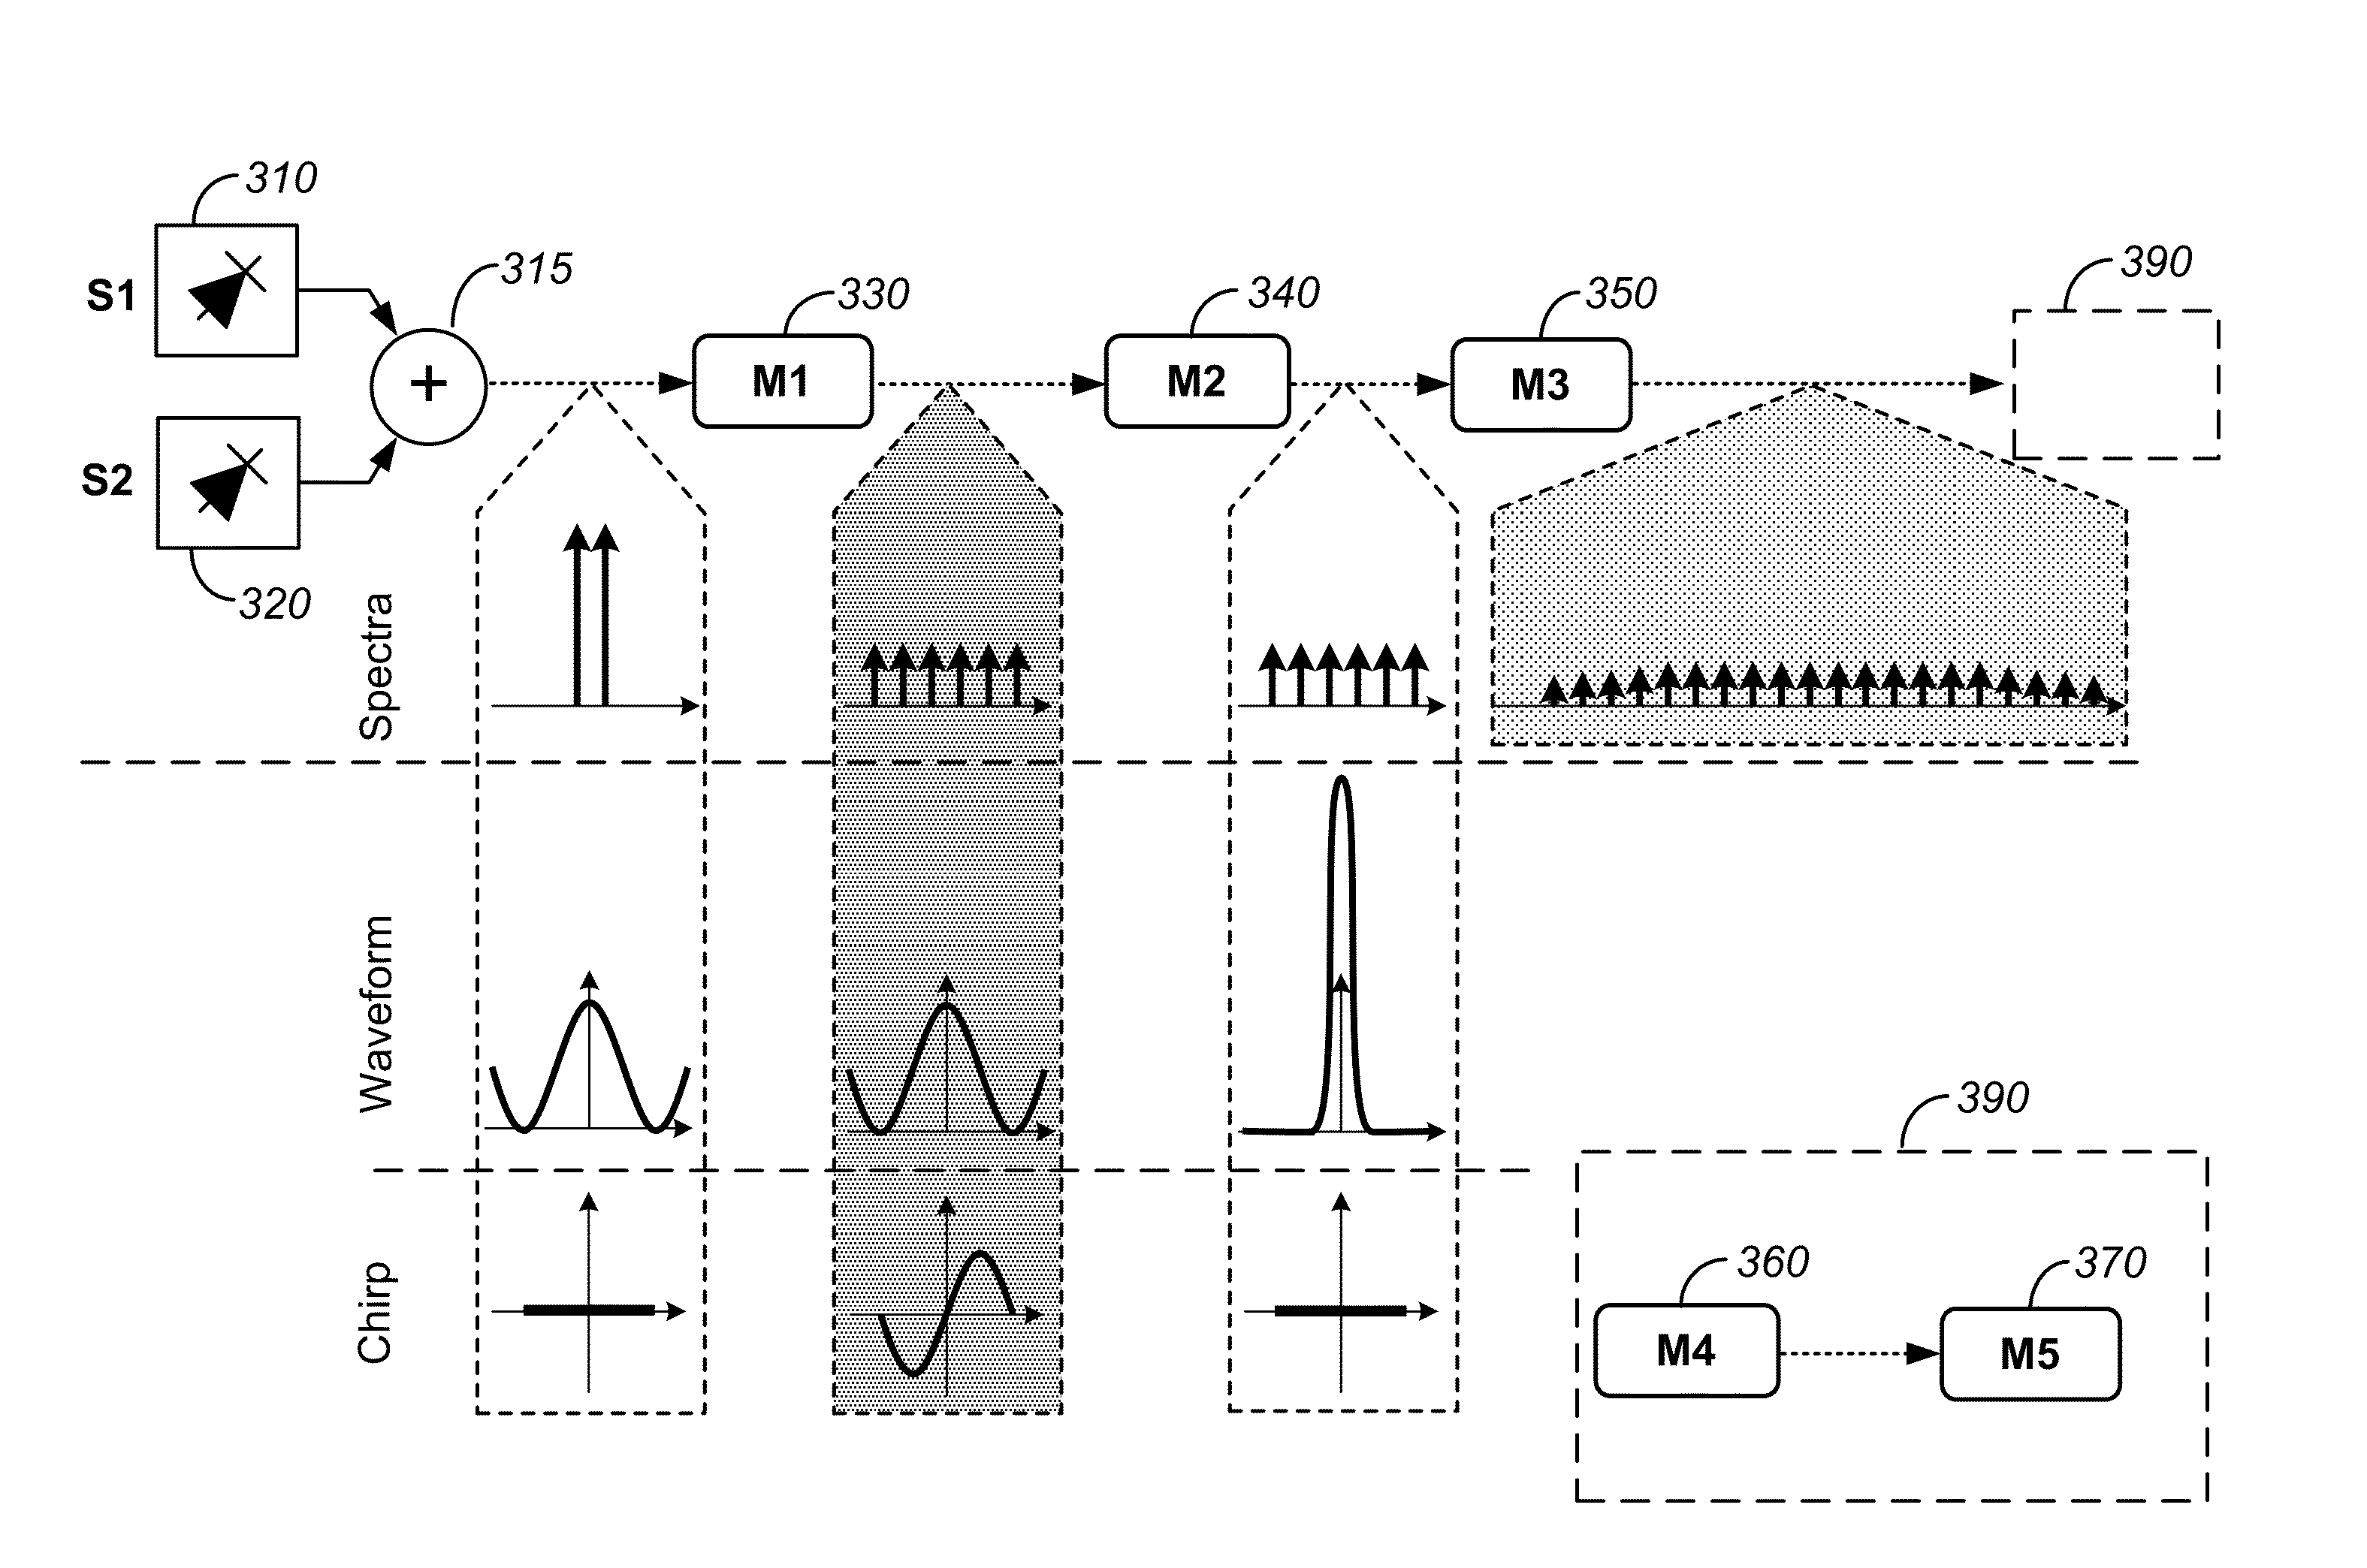 Methods and apparatus for power-equalized optical frequency comb generation